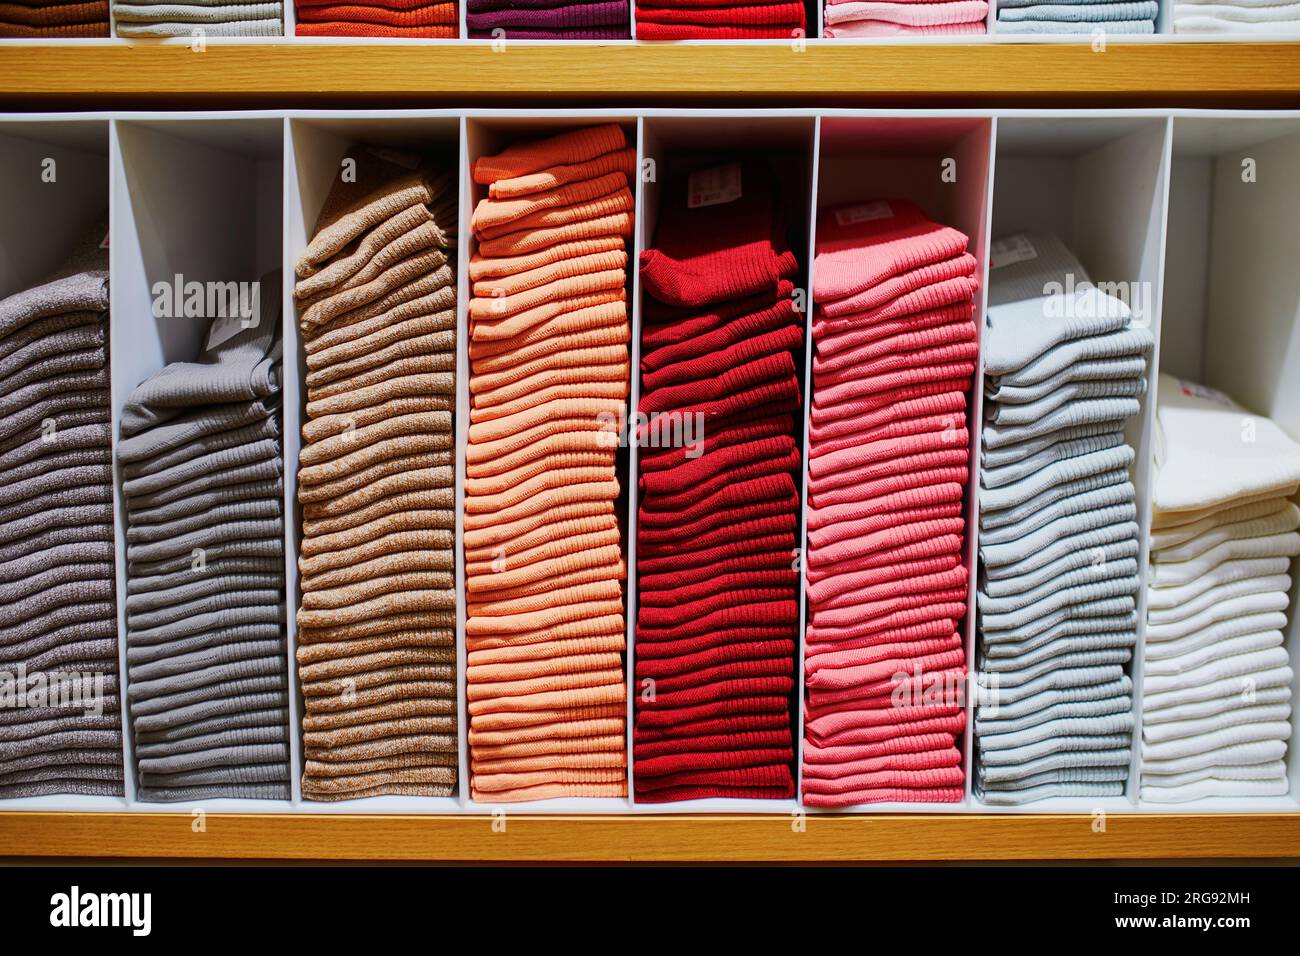 Cotton socks folded neatly in the clothing showroom. Multi-colored socks folded in brightly colored wardrobes. Shelves and colorful clothes in large s Stock Photo